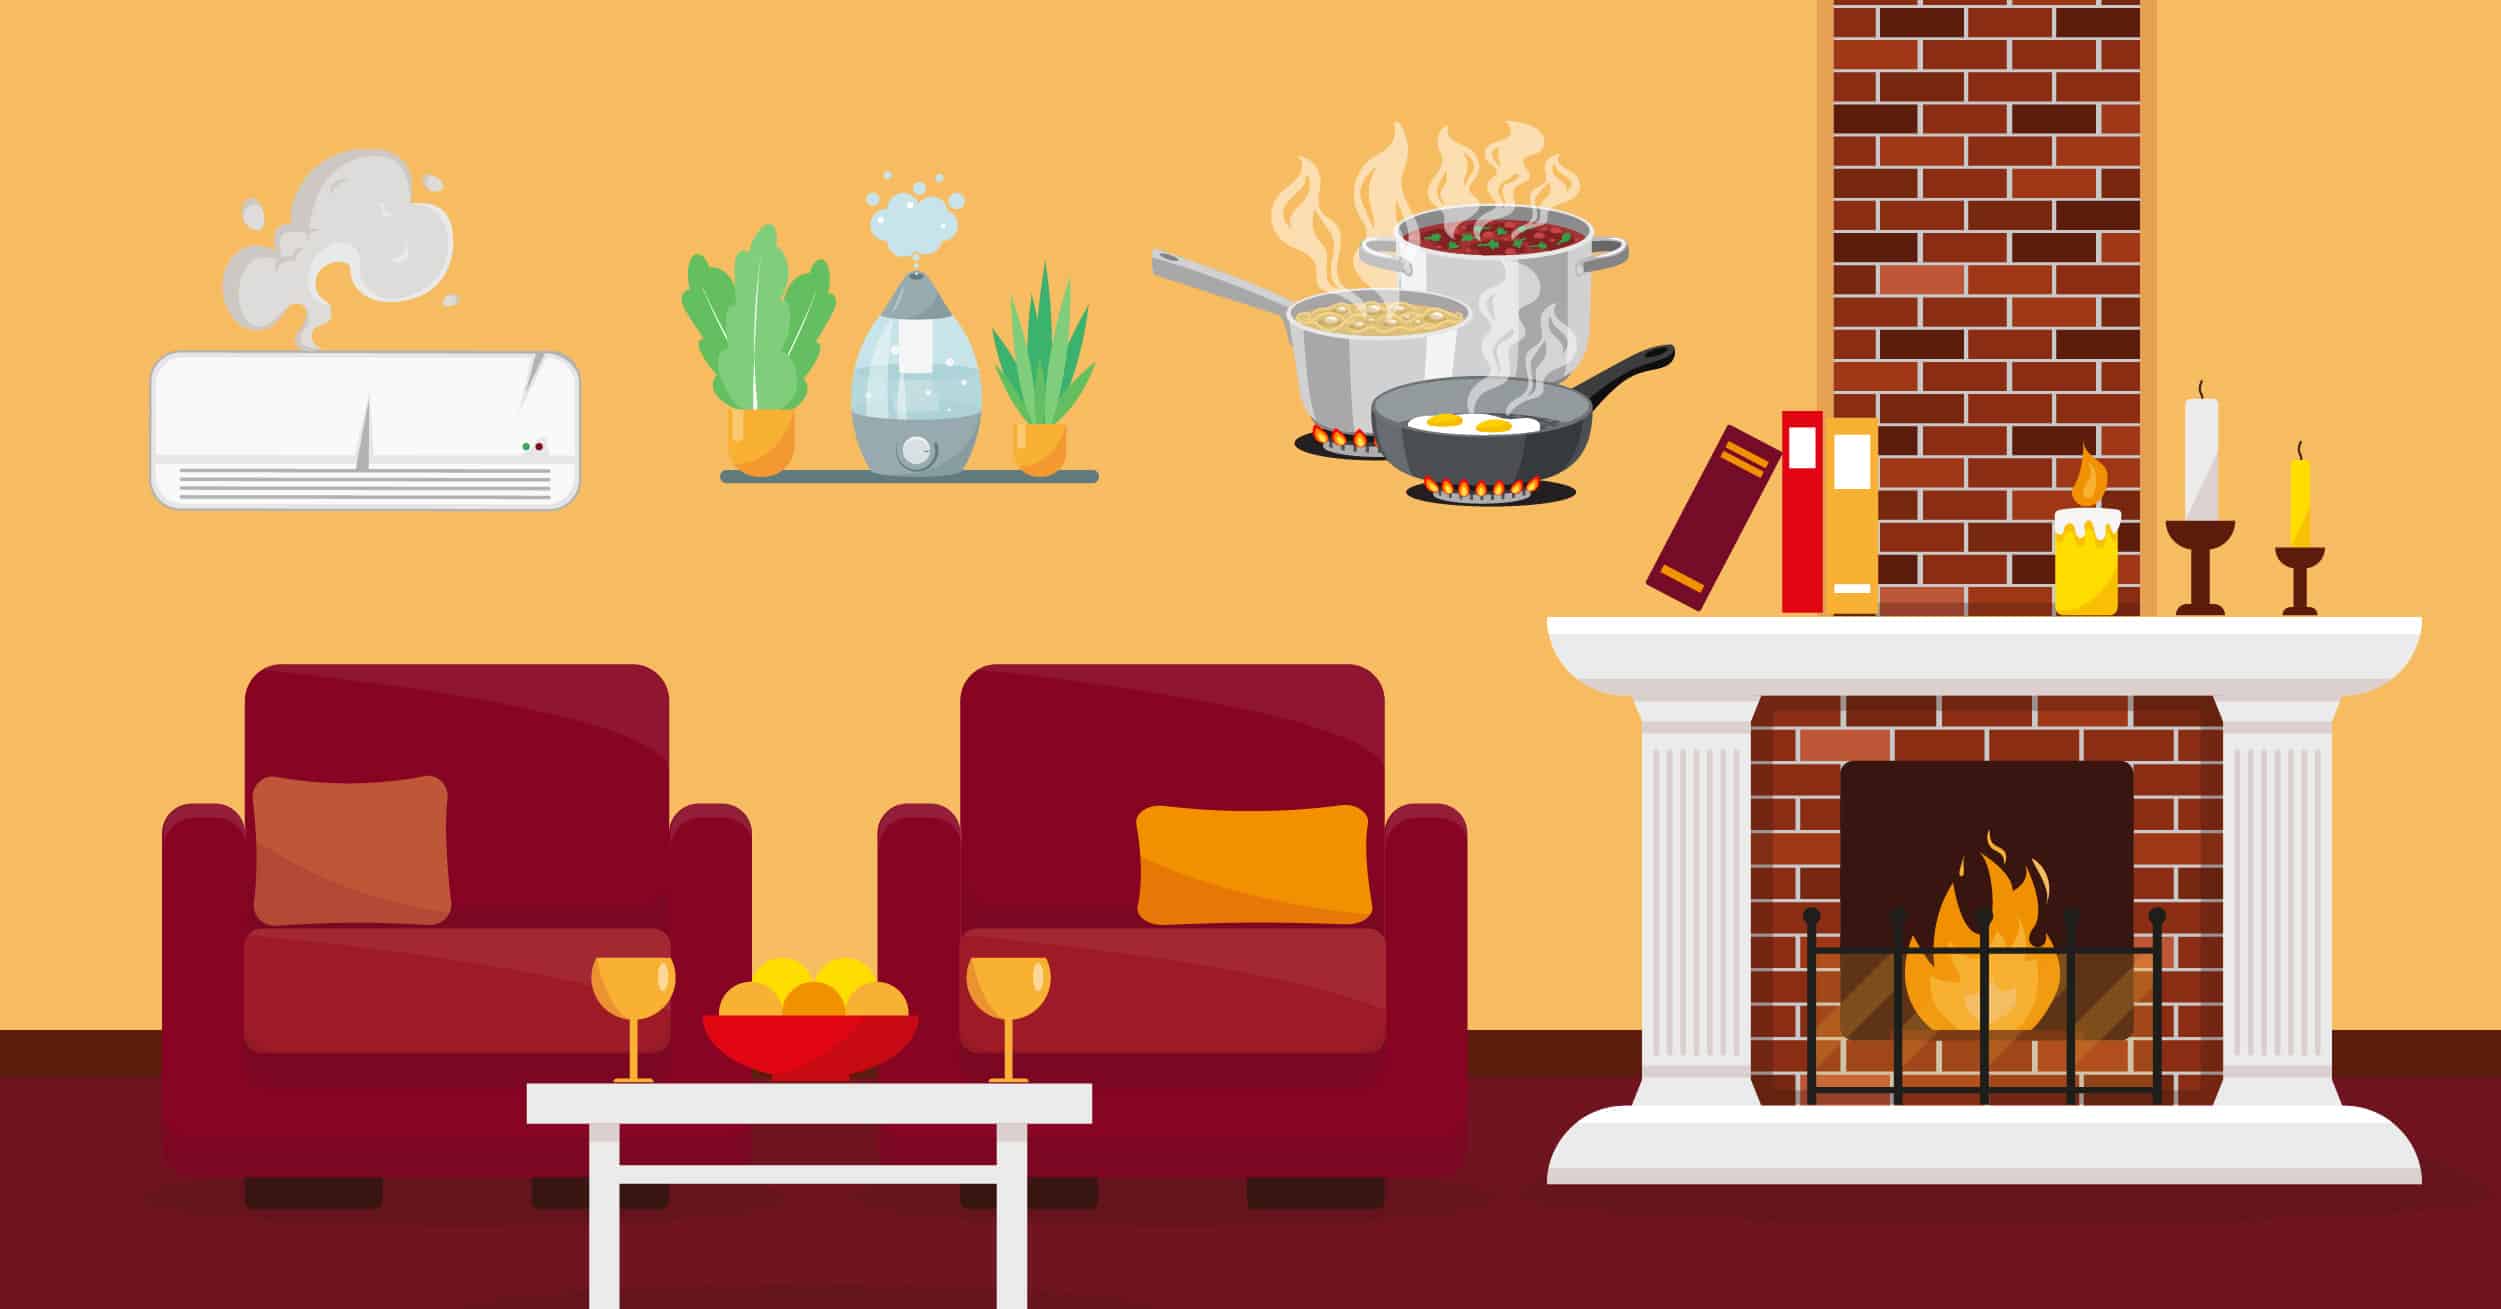 image of two chairs by a fireplace with iaq products around